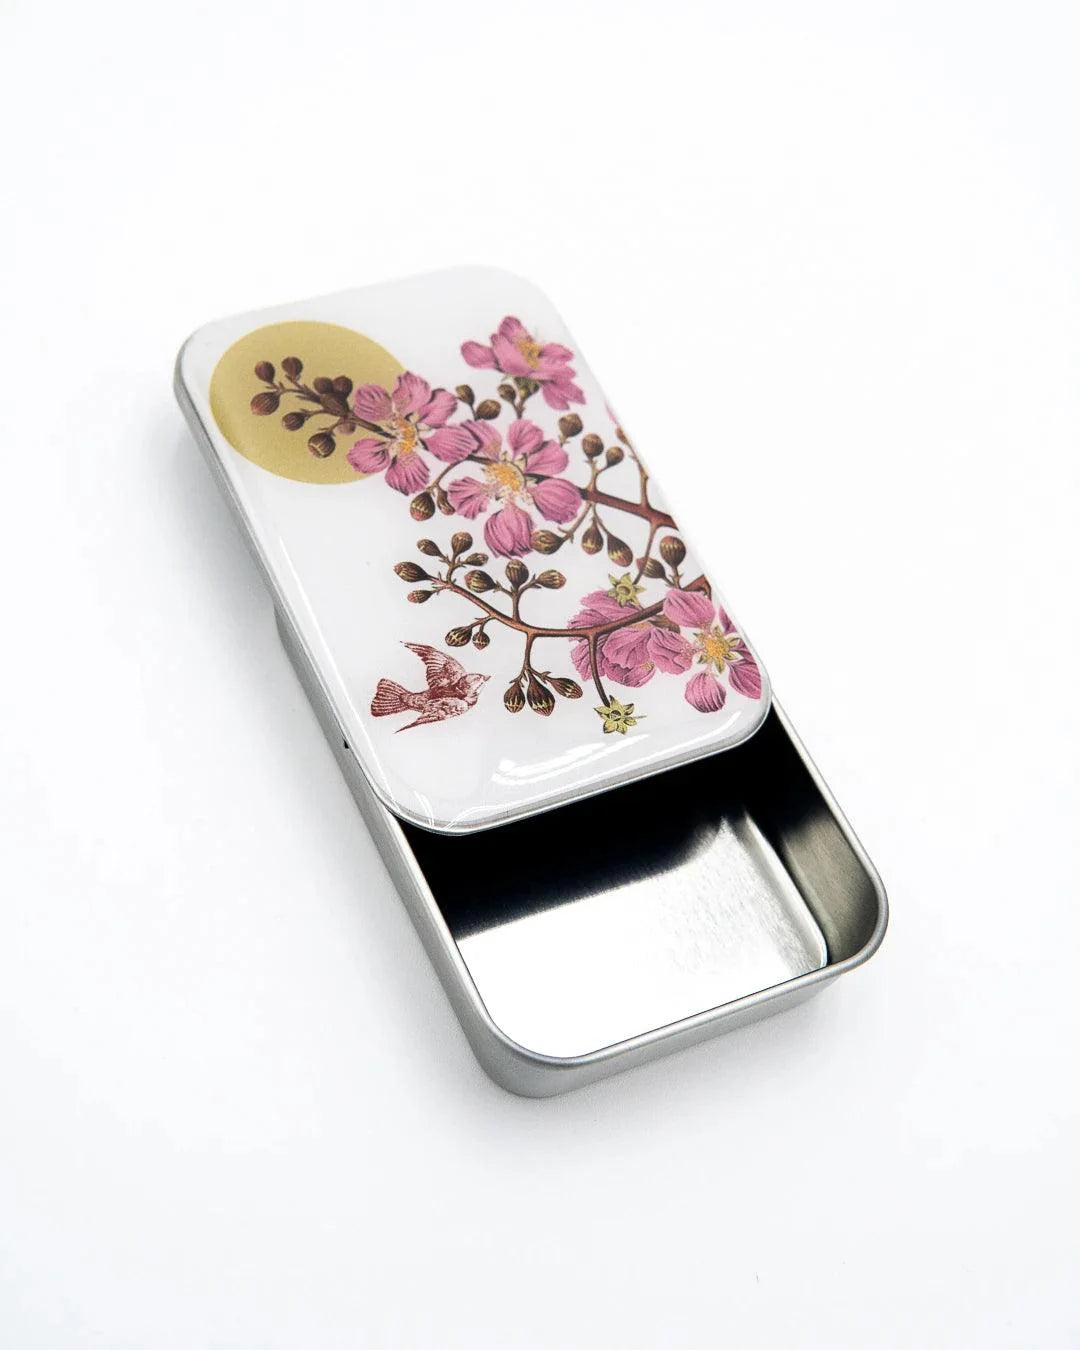 Cherry Blossom & Swallow Notions Tin